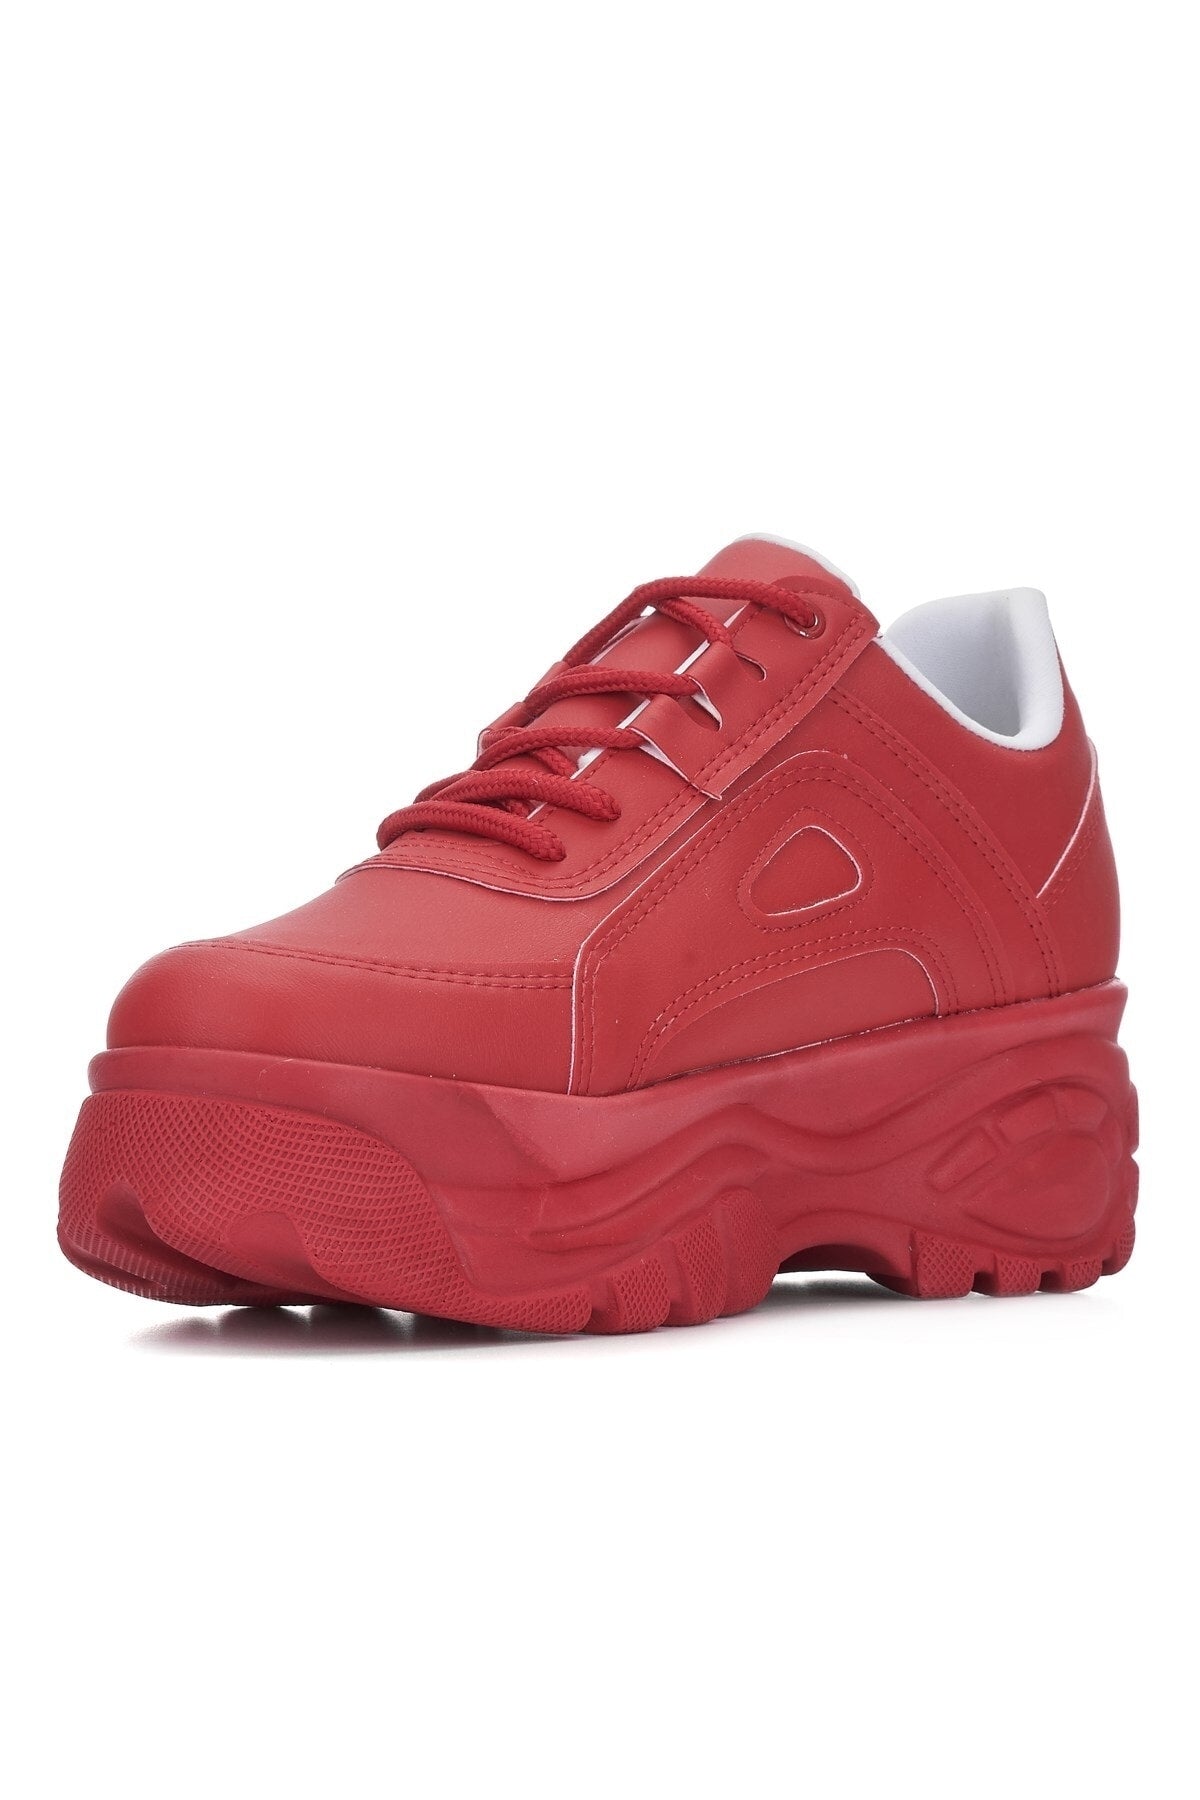 DAILY WOMEN RED SPORTS SHOES HIGH SPEED 6 CM CASHING LIGHT SMEaker 001